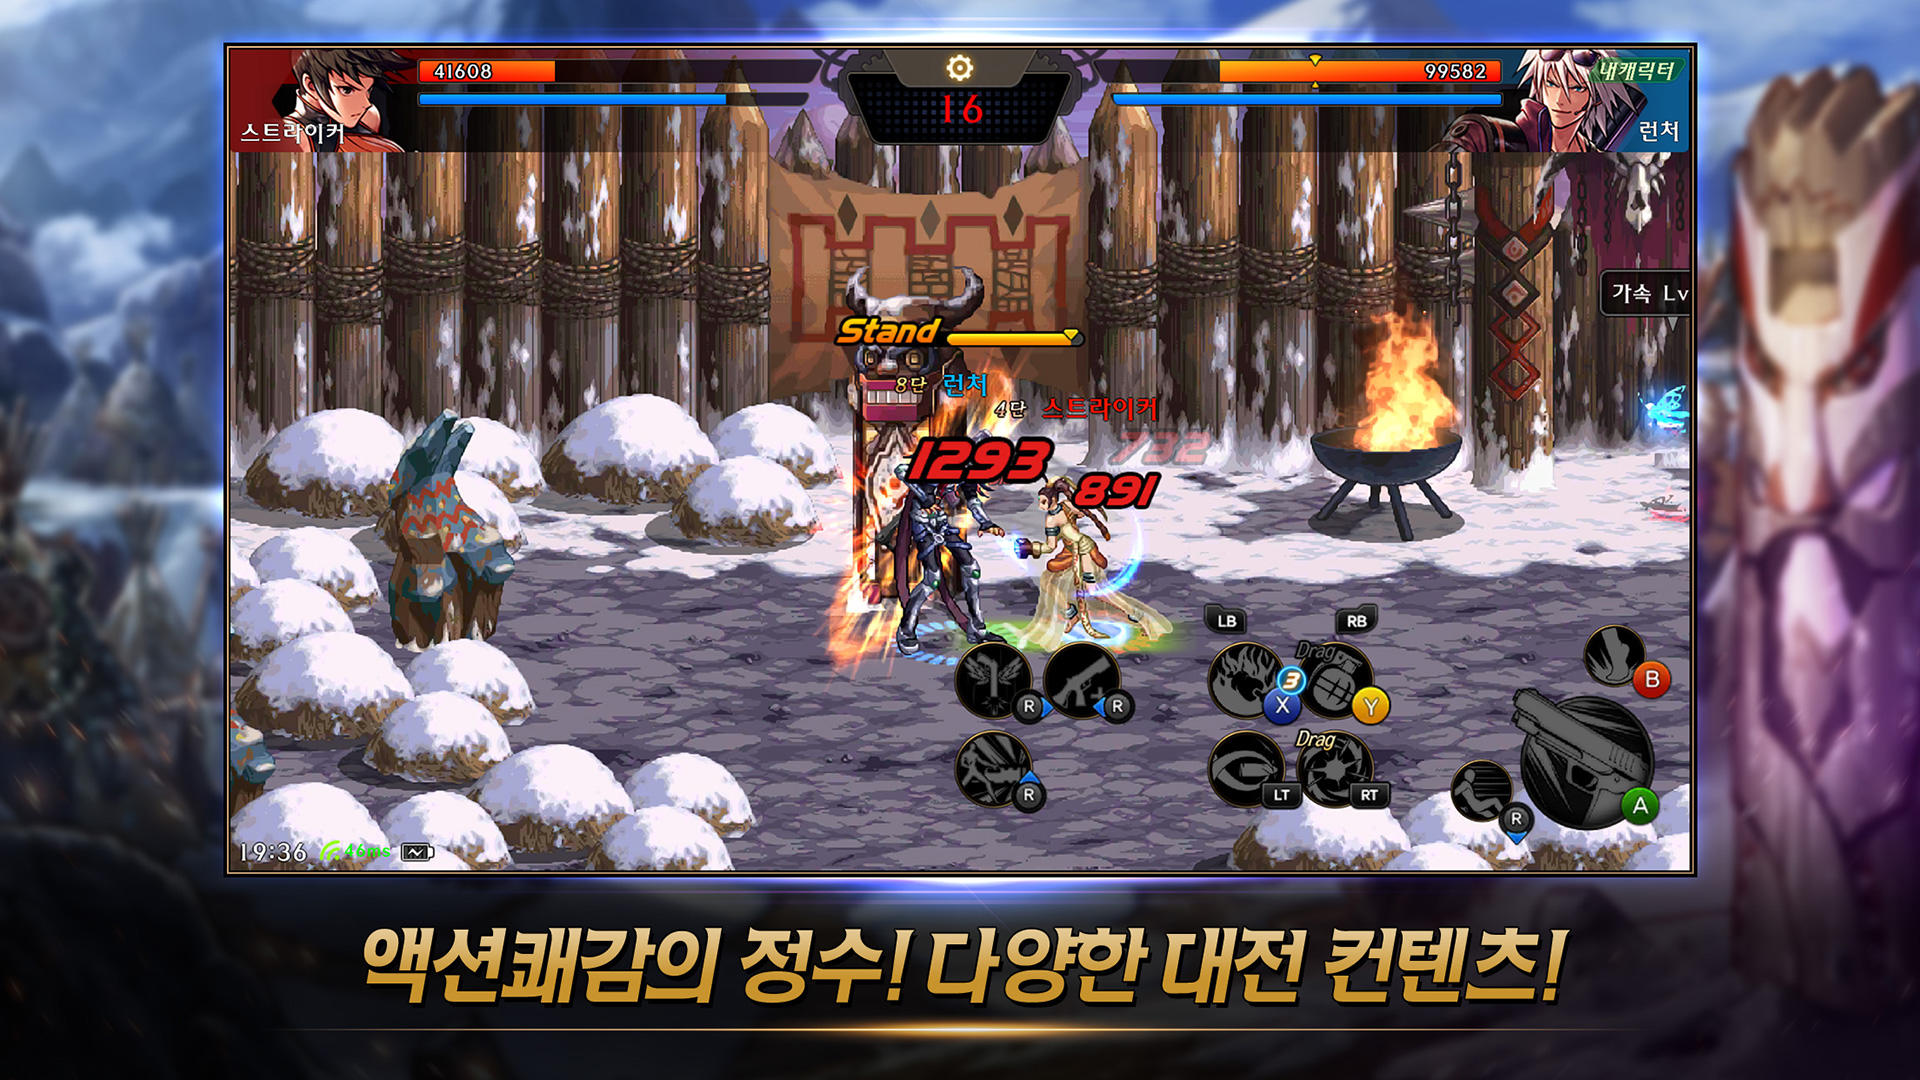 DungeonFighterMobile好玩吗 DungeonFighterMobile玩法简介